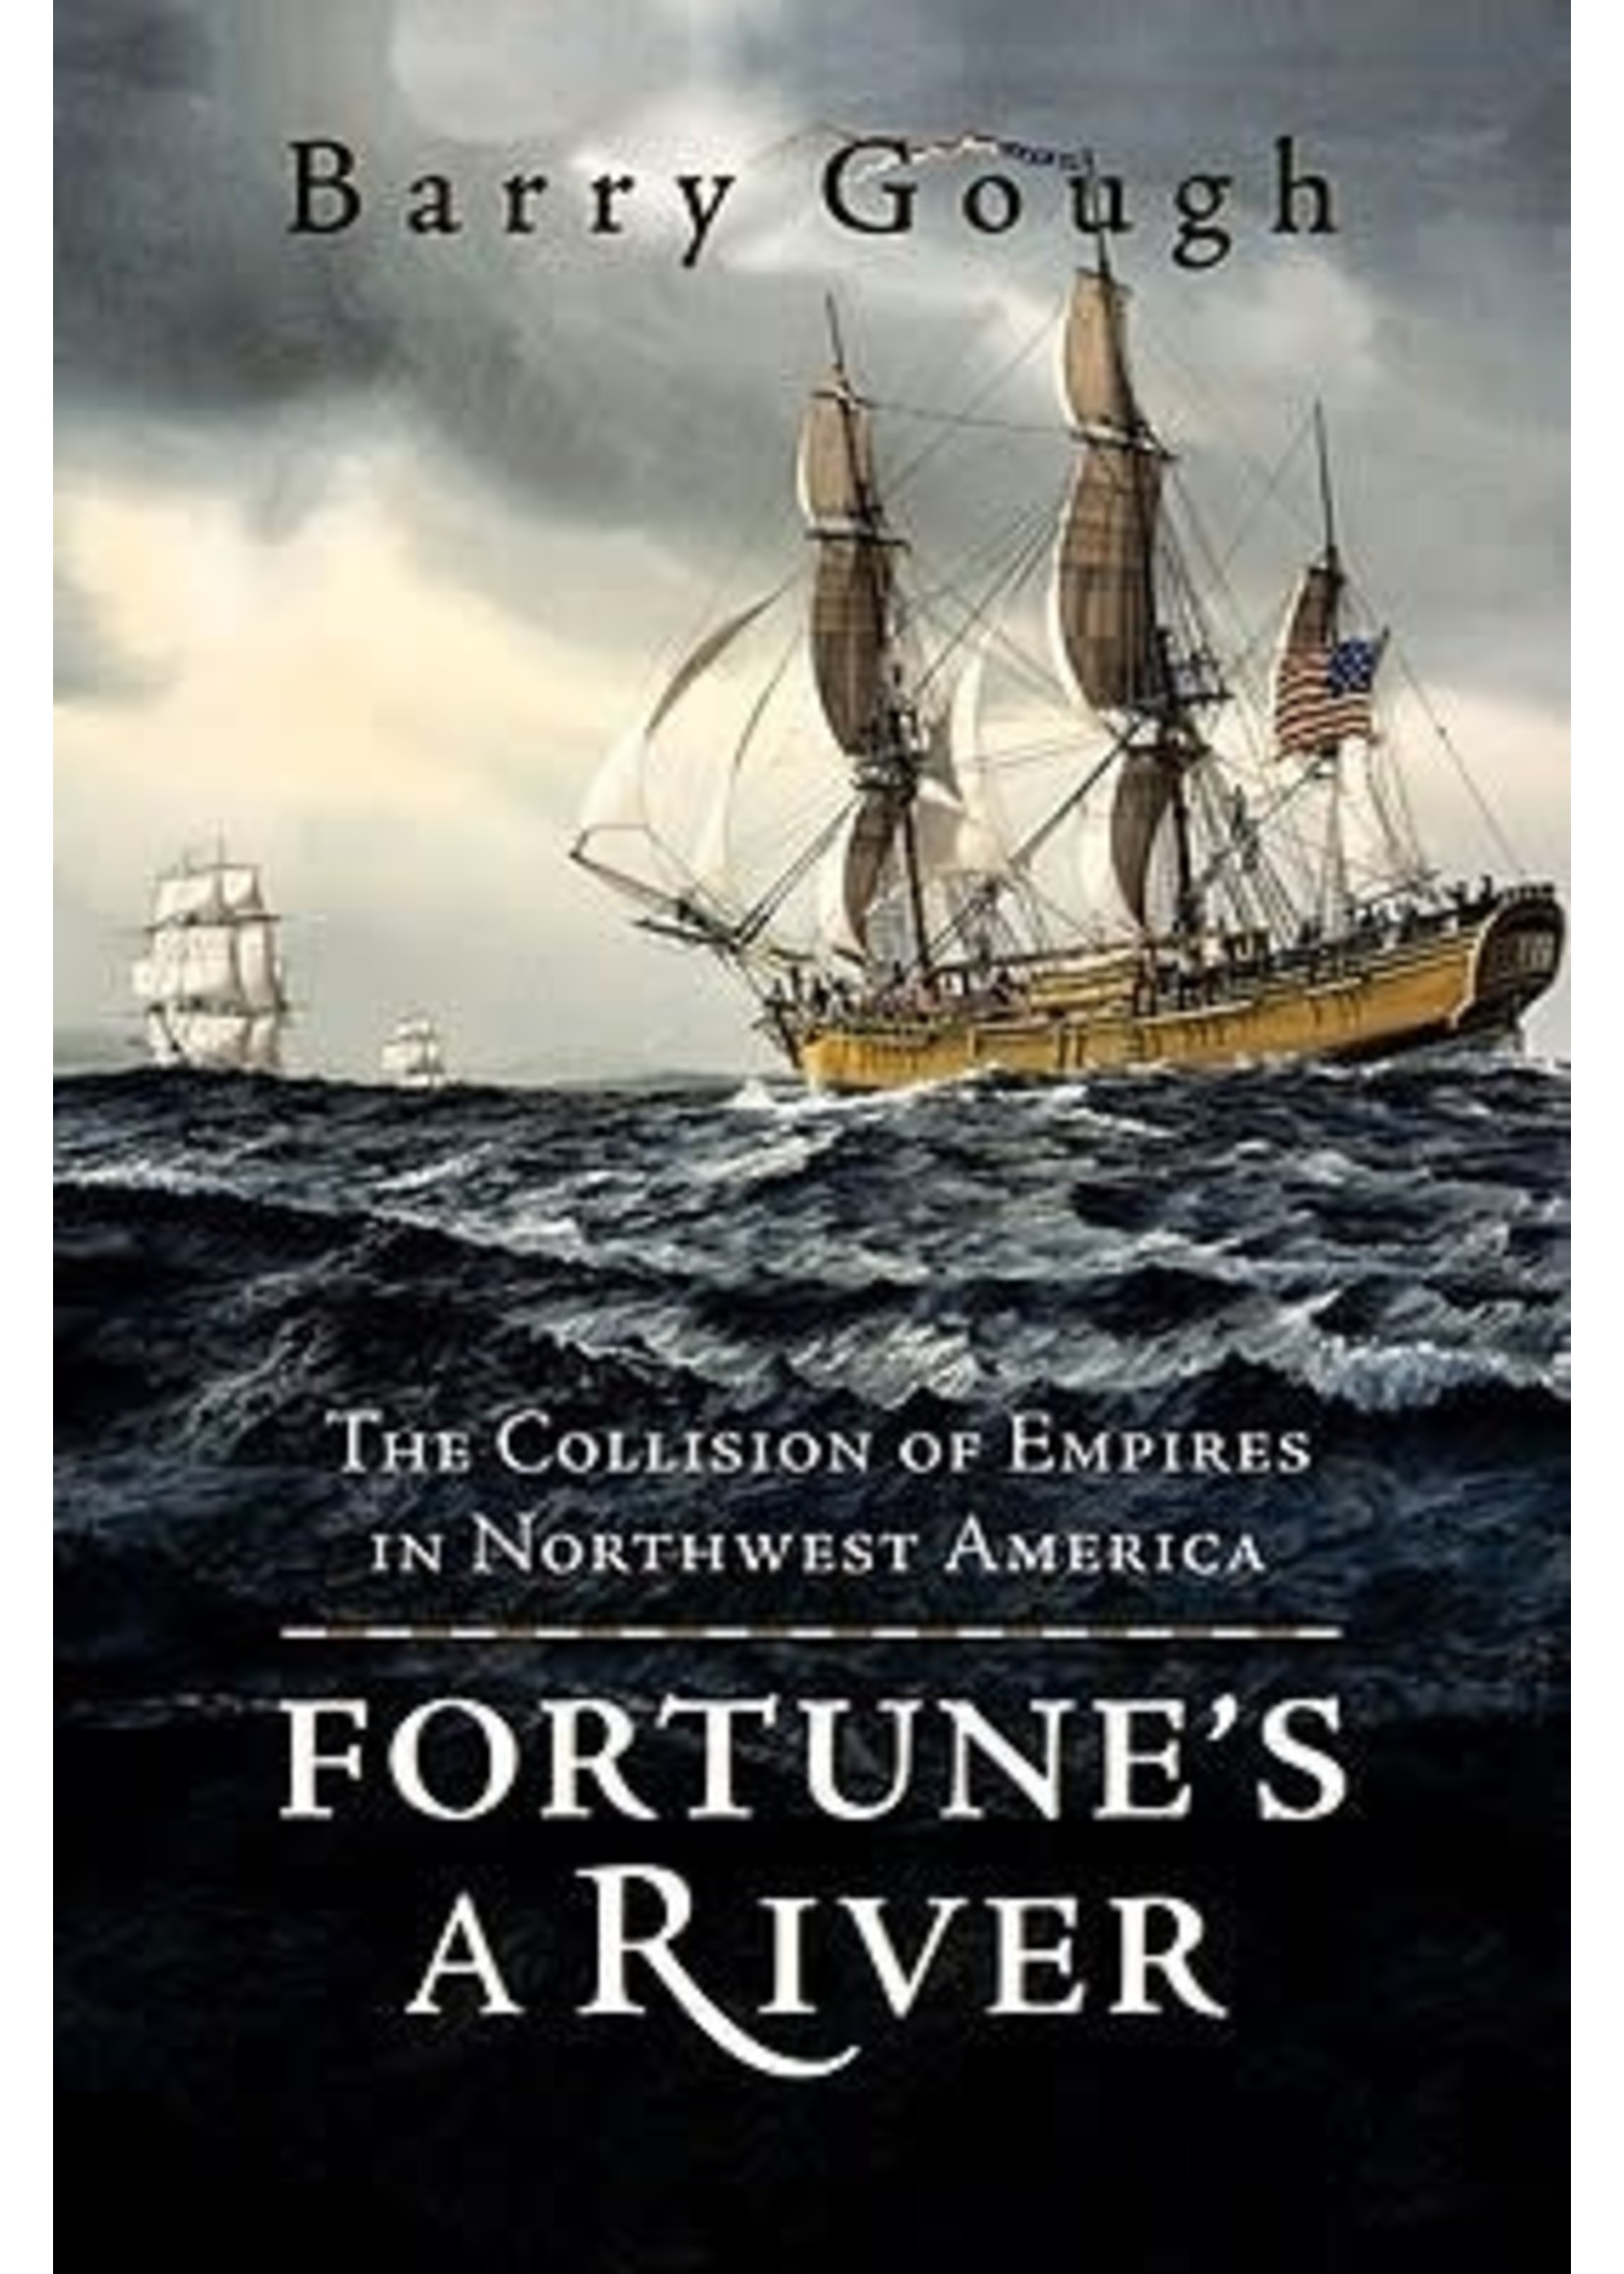 Fortune's A River: The Collision of Empires in Northwest America by Barry M. Gough